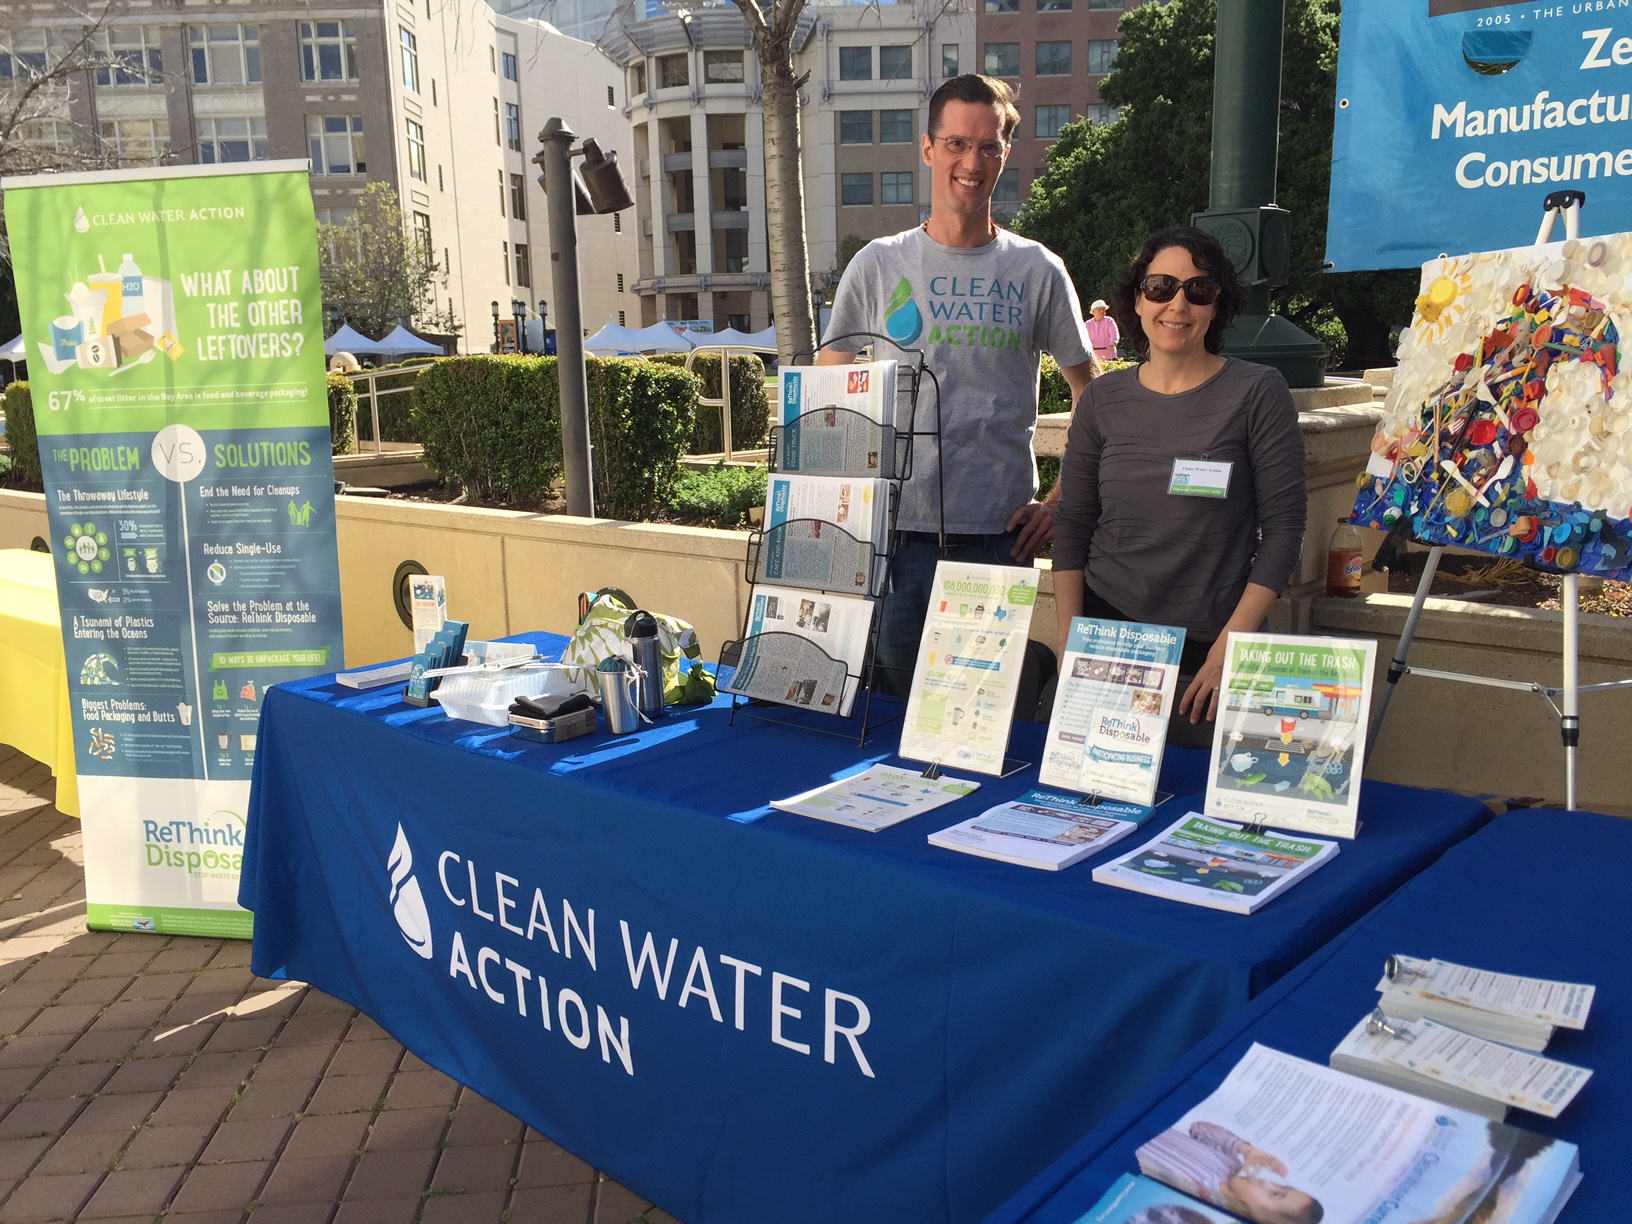 The author (left) and Waste Prevention Program Associate Dara Rossoff Powell (right), tabling on Wednesday, April 6 at the City of Oakland’s Earth Expo event, downtown.